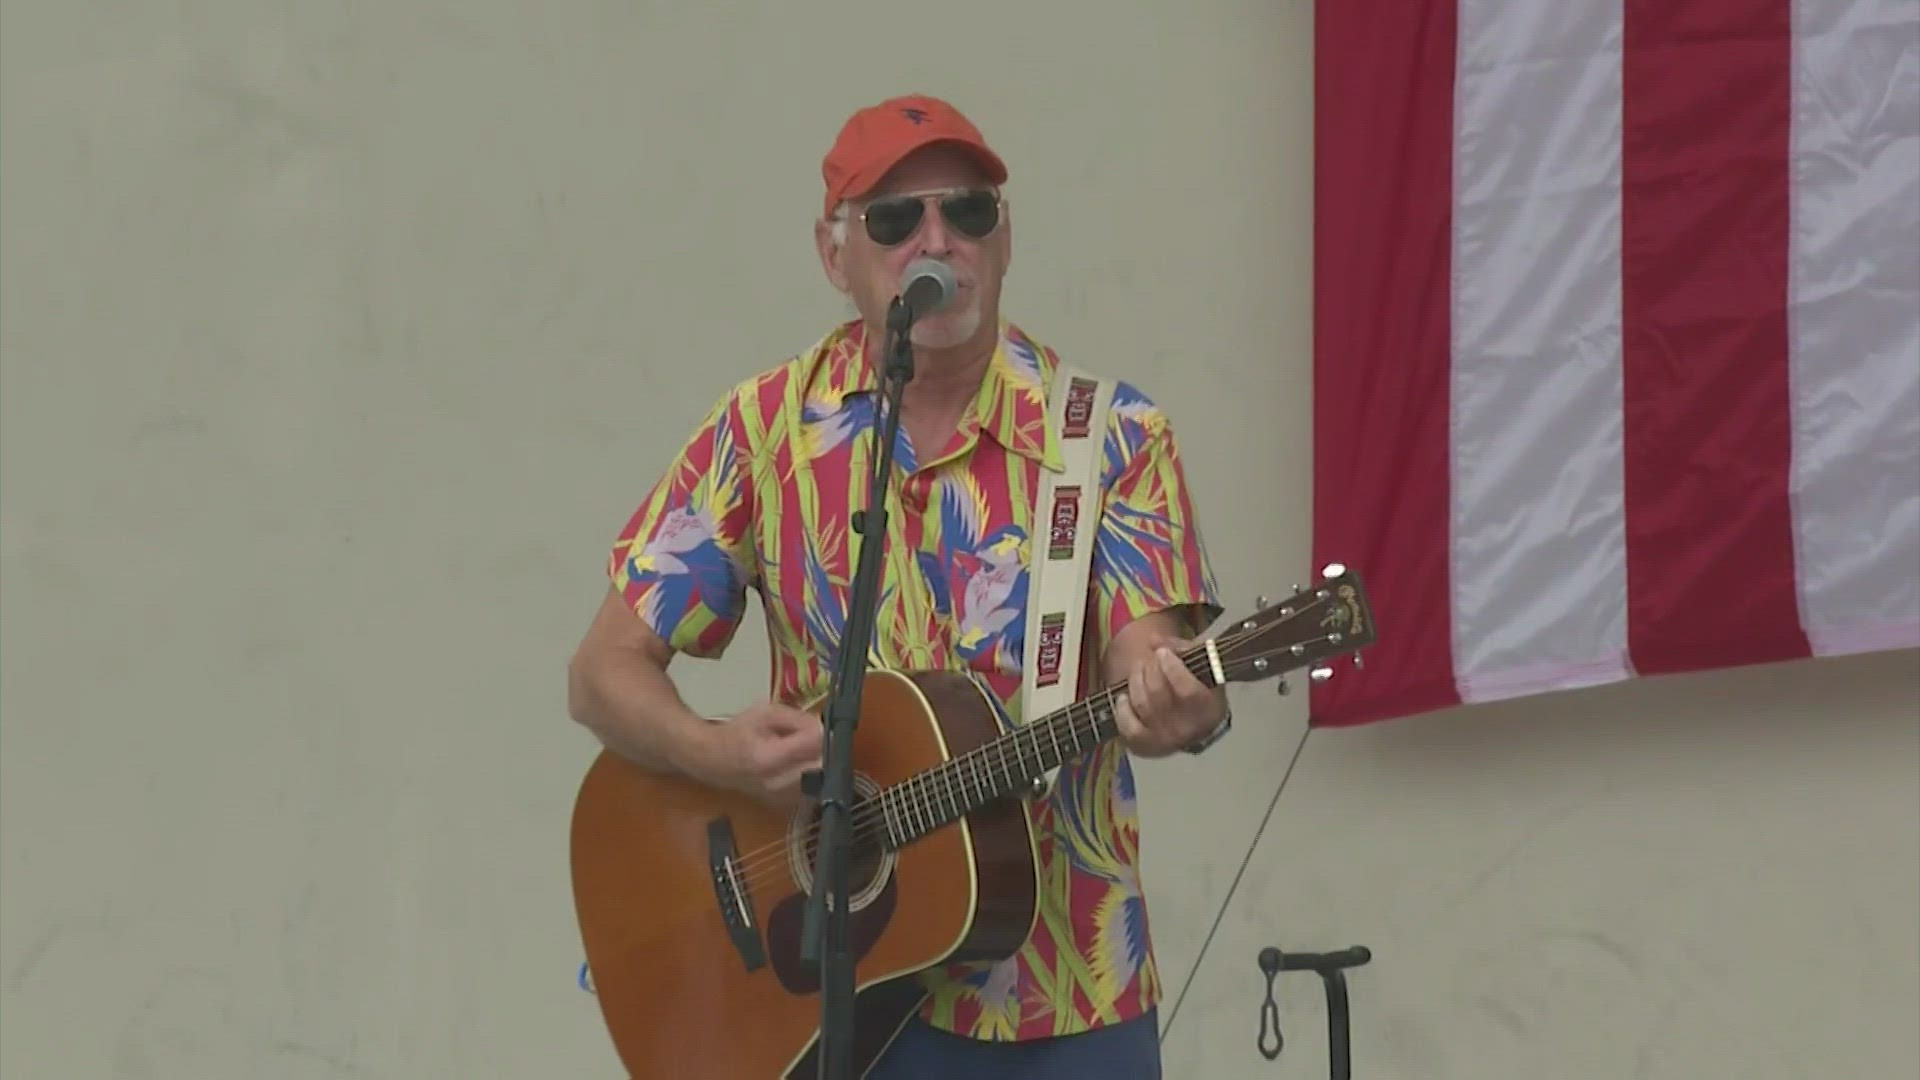 The "Margaritaville" singer shared a message with fans about some recent health issues.